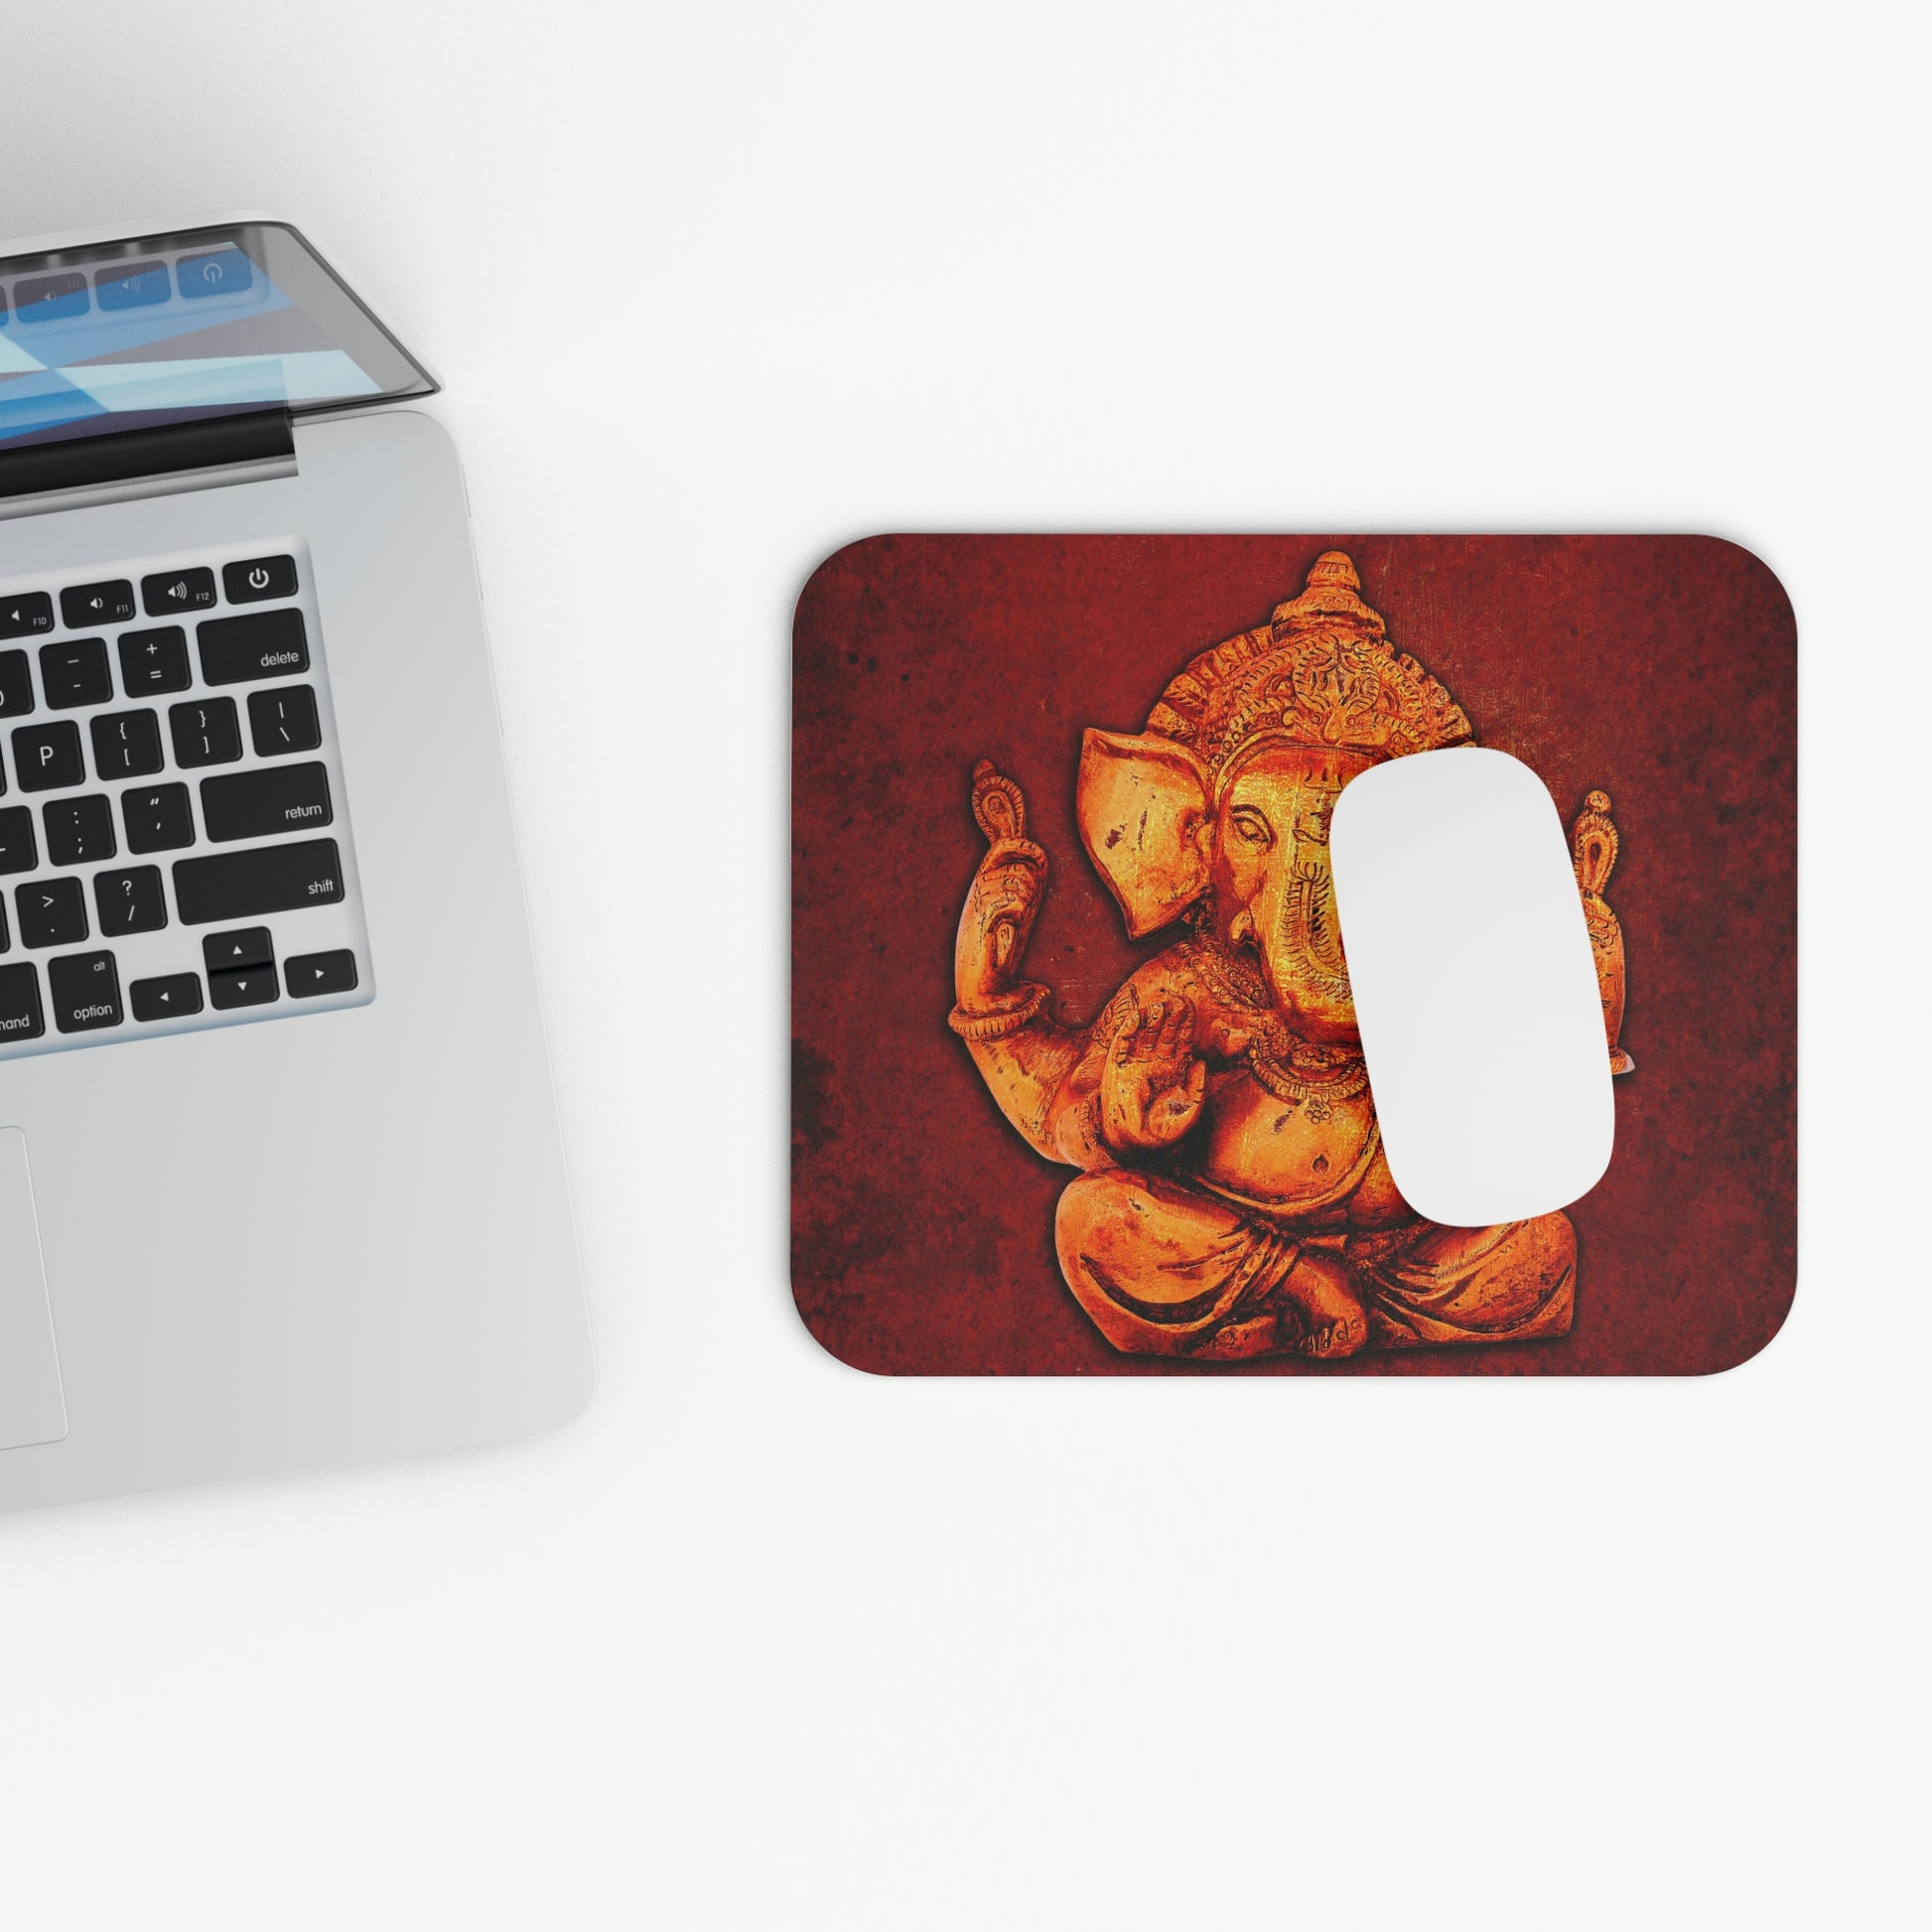 Hindu Deities Themed Desk Accessories - Gold Ganesha on Lava Red Background Print on Mouse Pad in situ